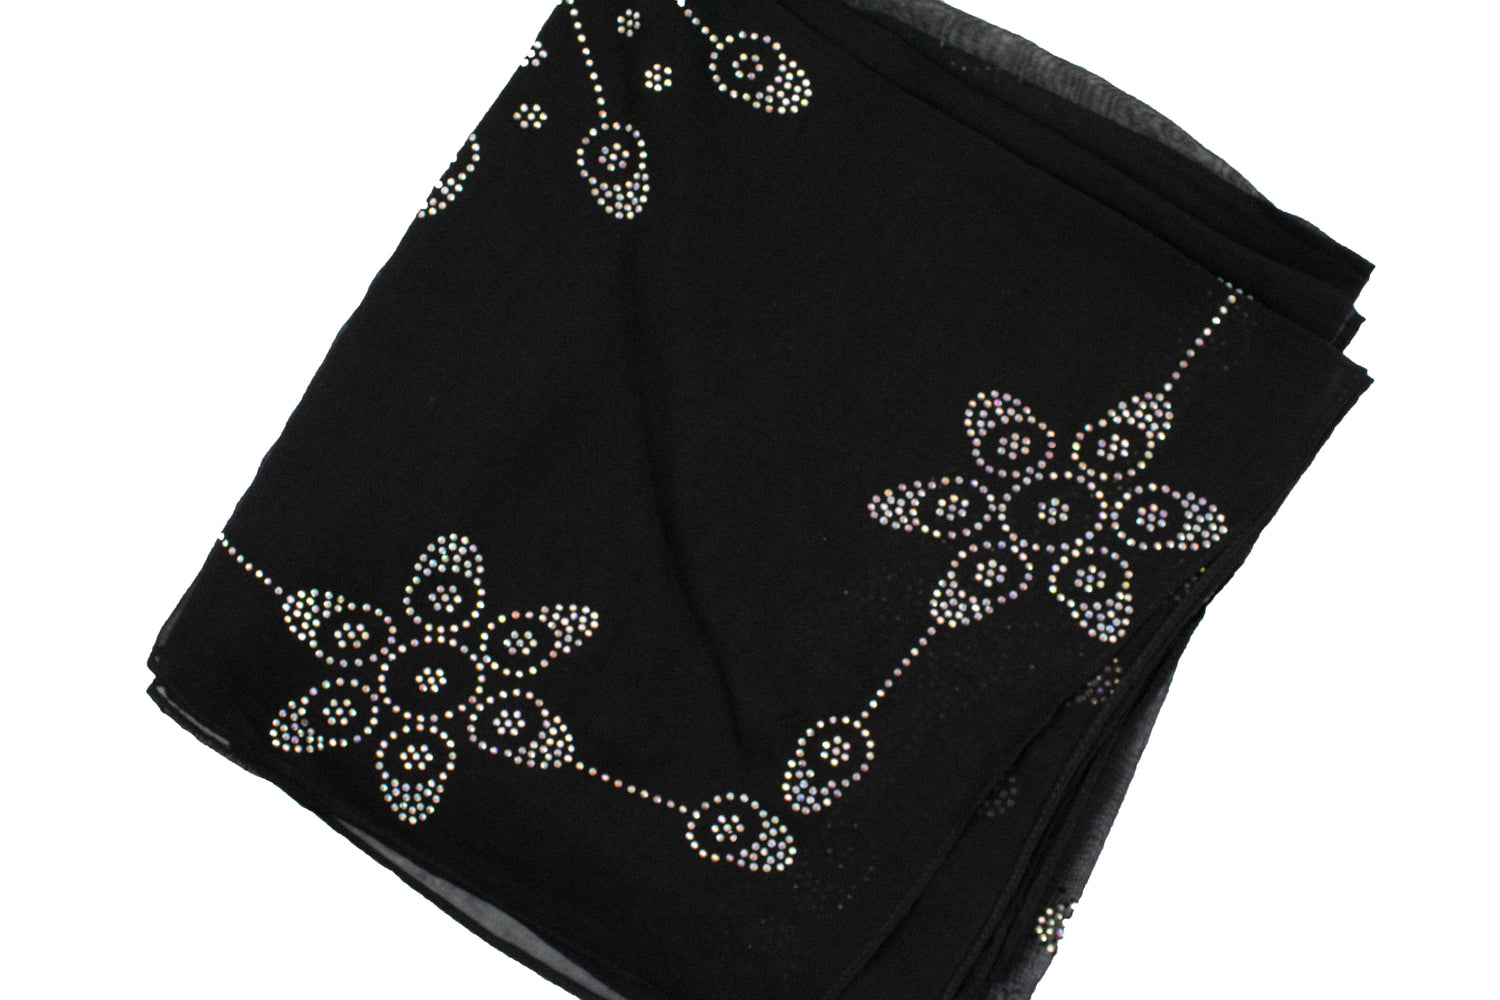 black square hijab embellished with jewels in a floral and geometric pattern